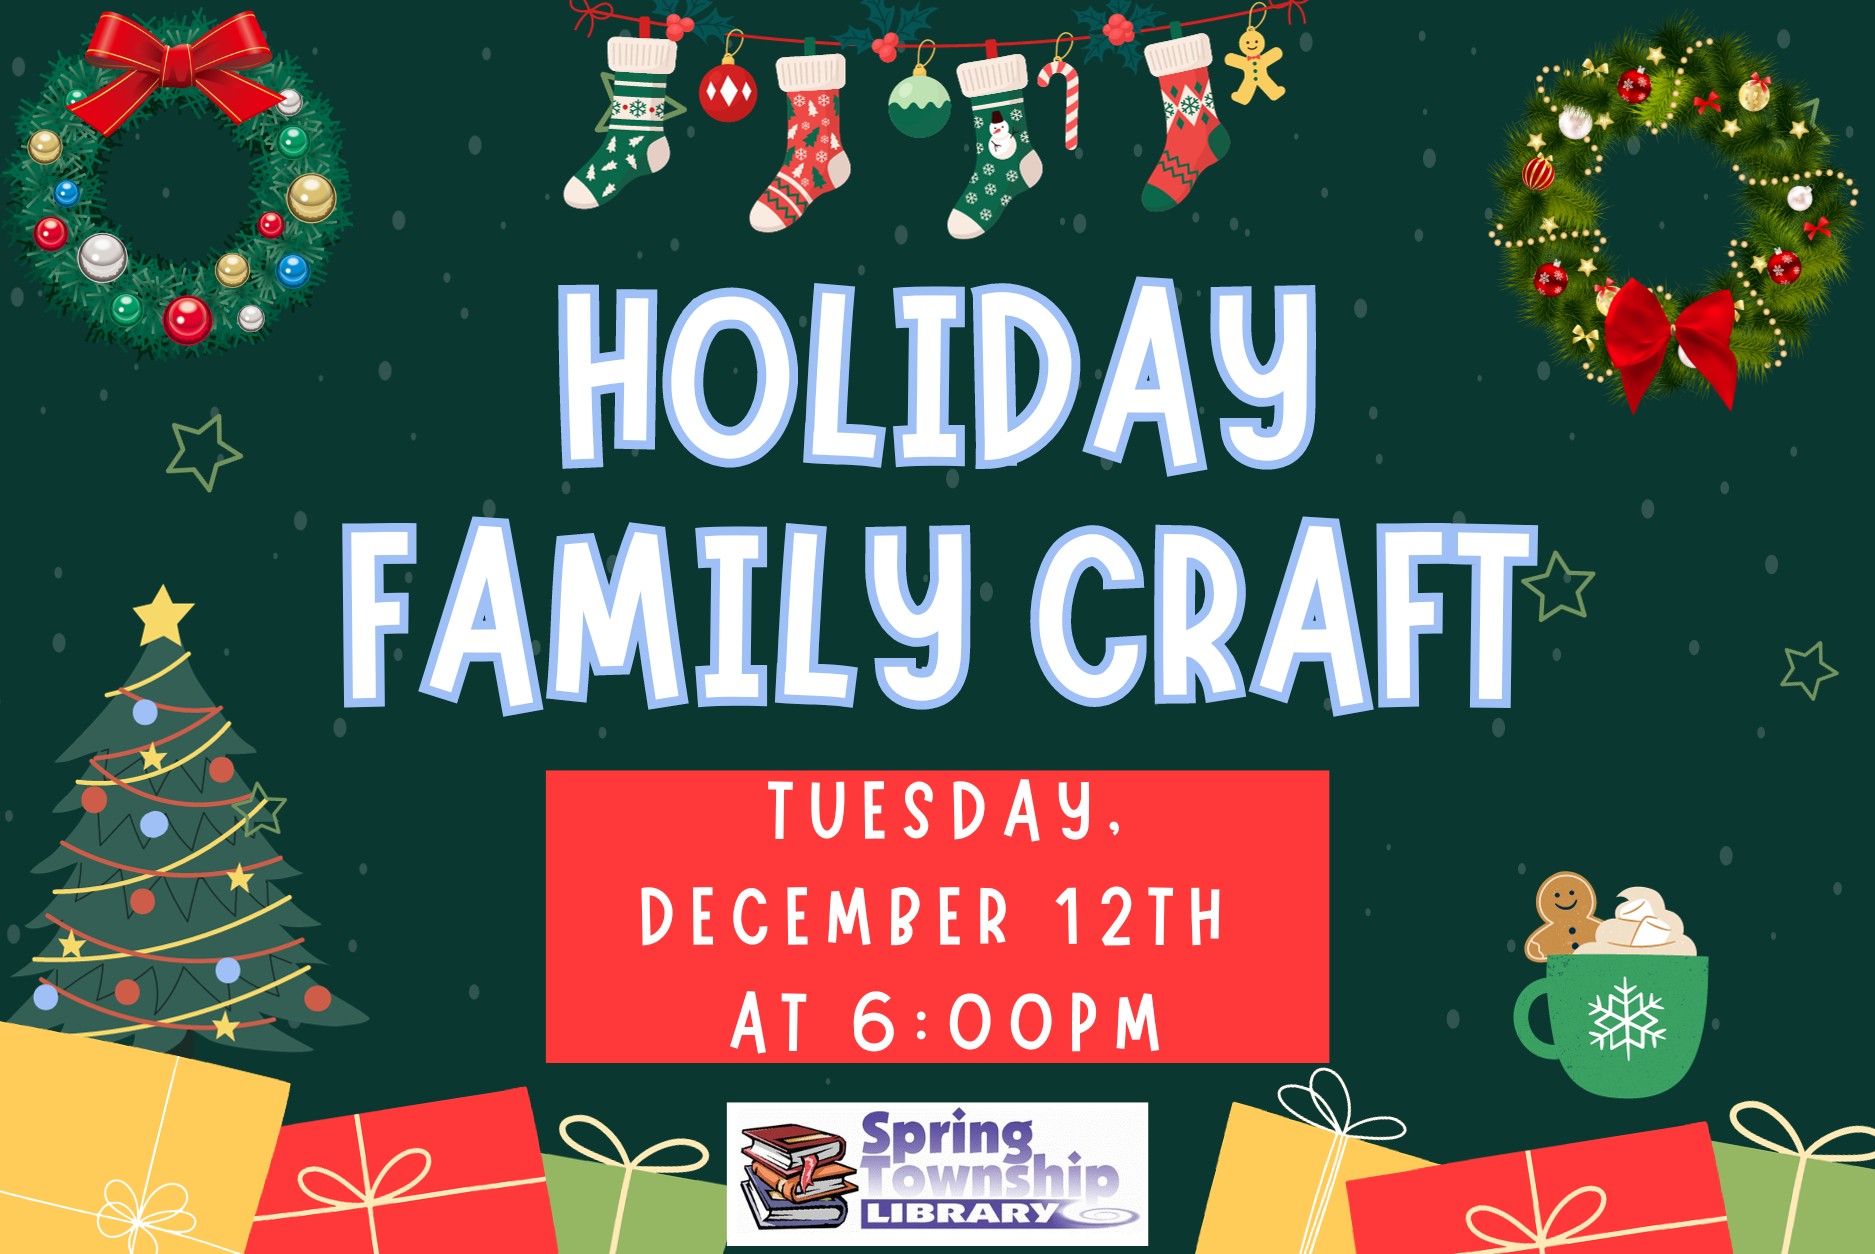 Tuesday, December 12th at 6:00PM  Free!  Join us for a holiday craft night! Open to all ages.  The craft will follow our story time.